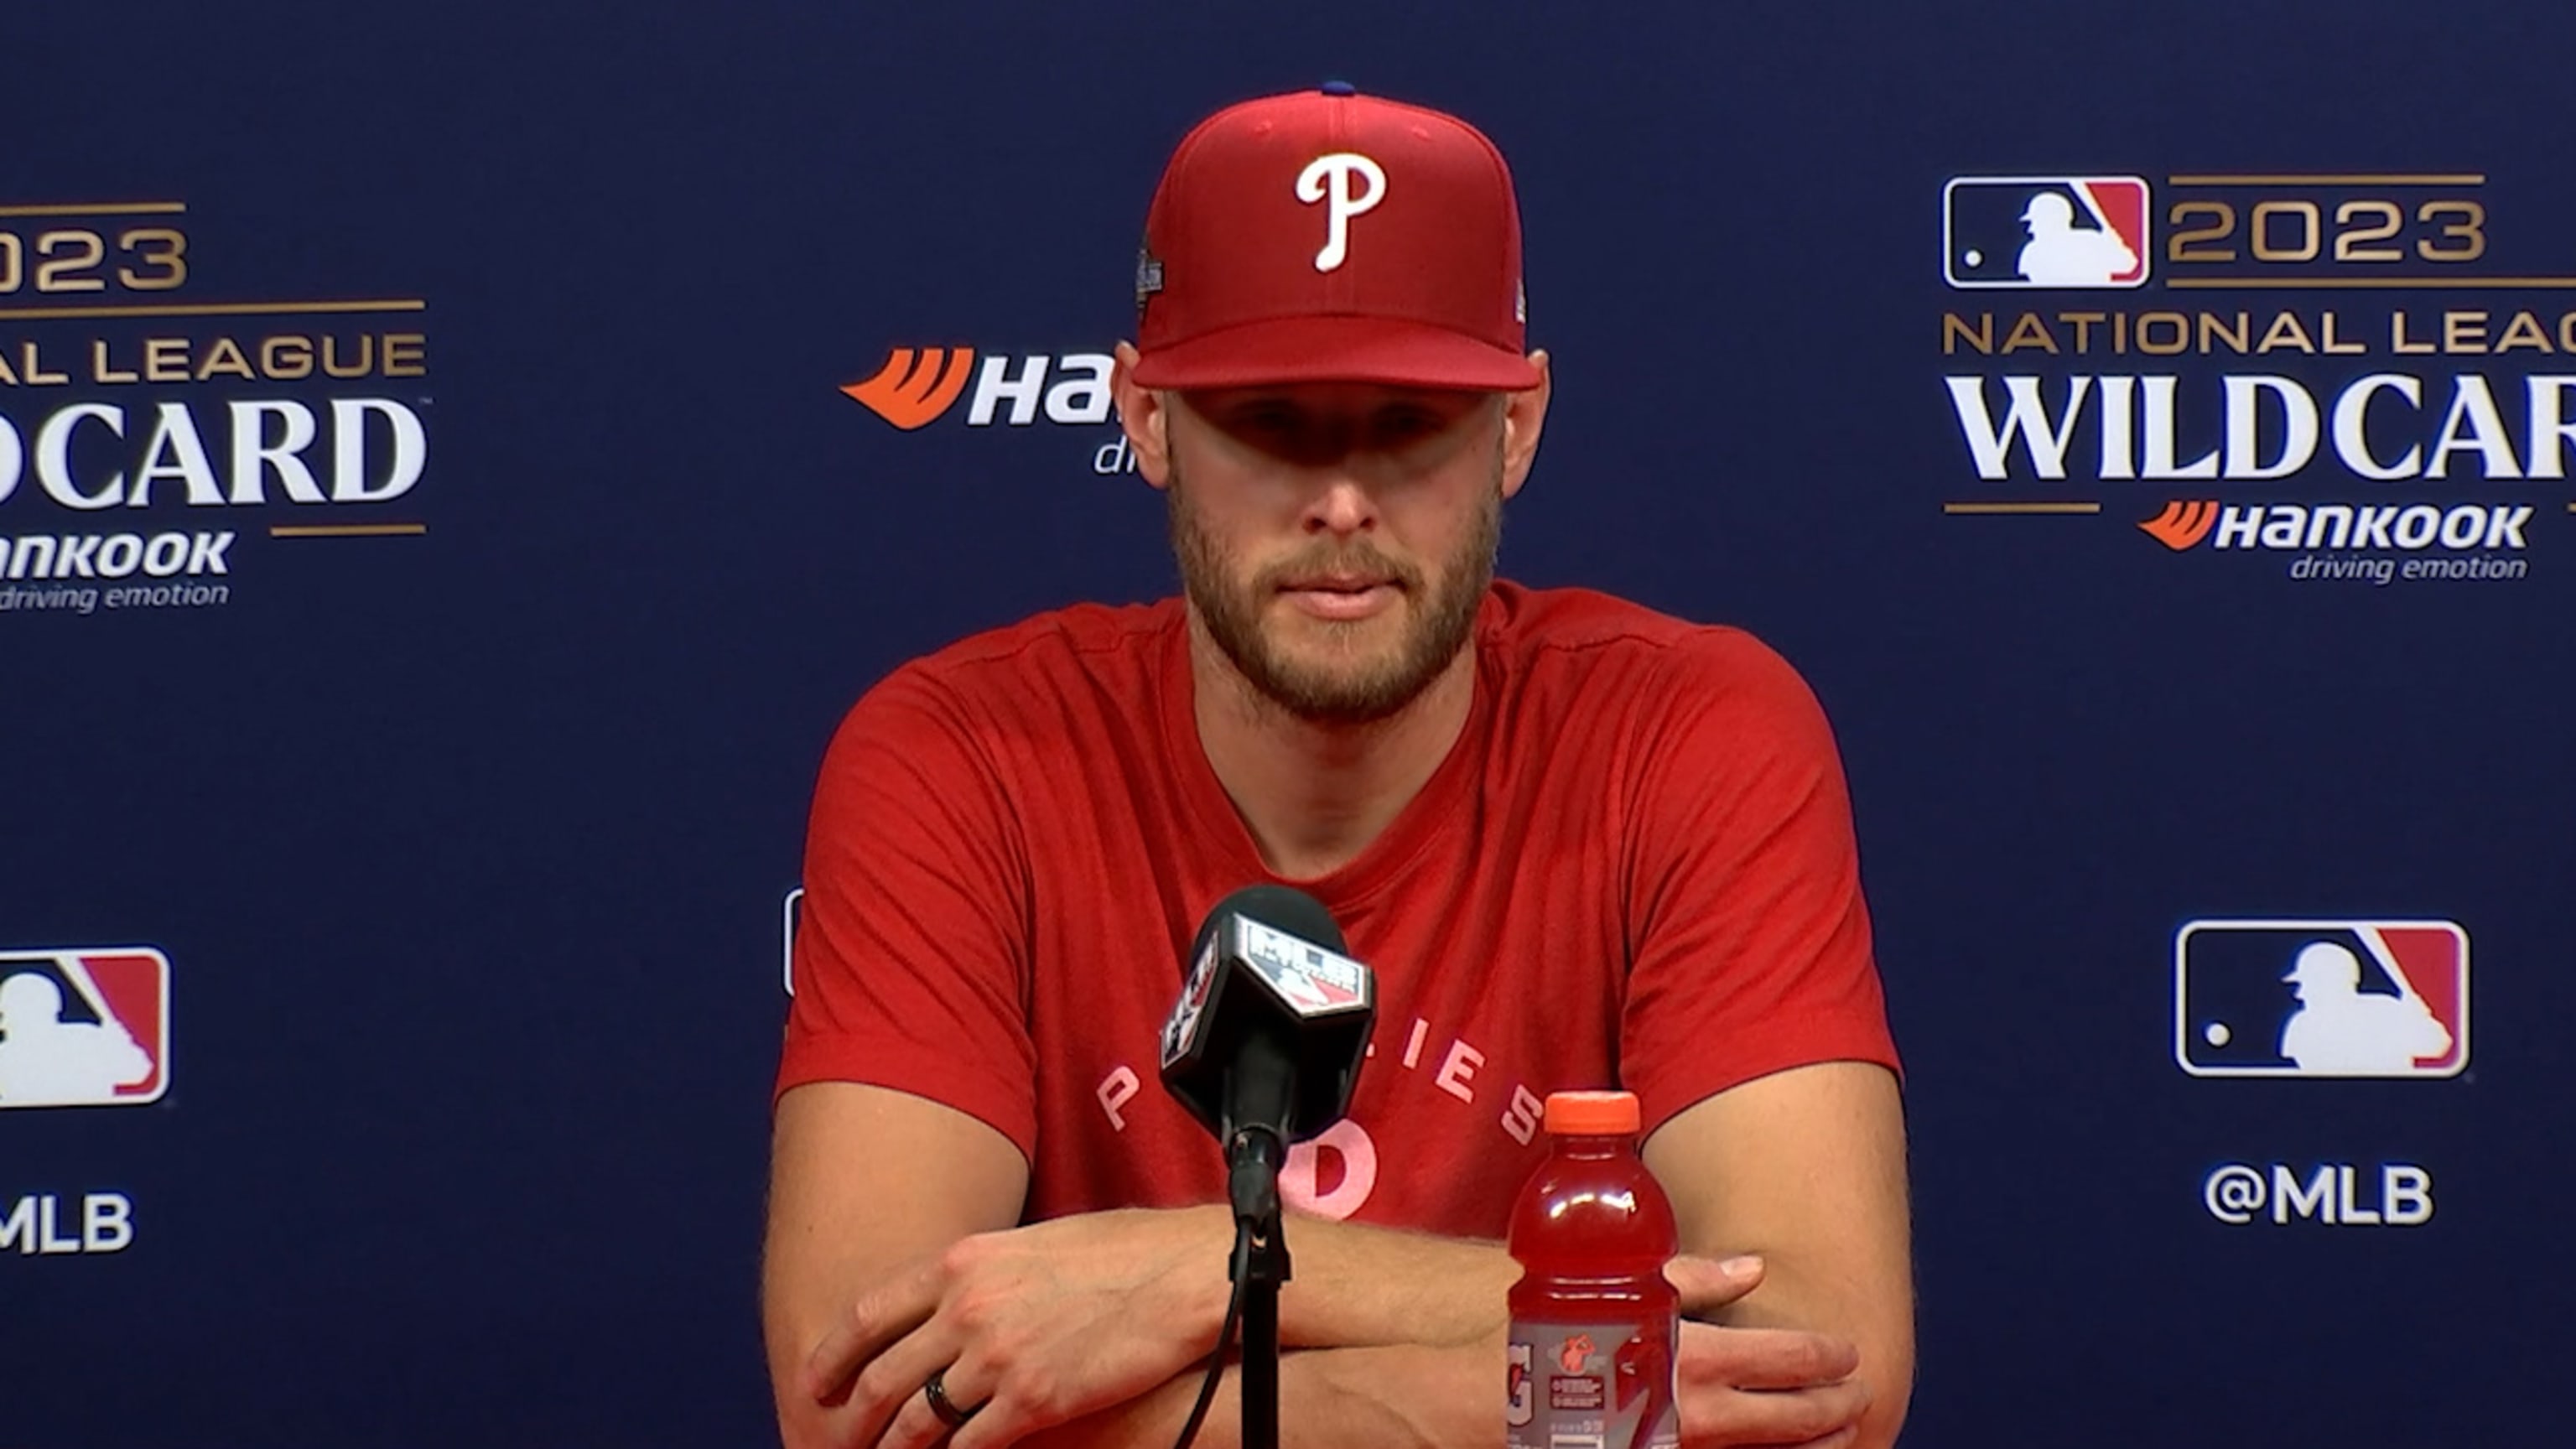 Zack Wheeler and the Philadelphia Phillies ready for WC game 1 vs the  Marlins at Citizens Bank Park 